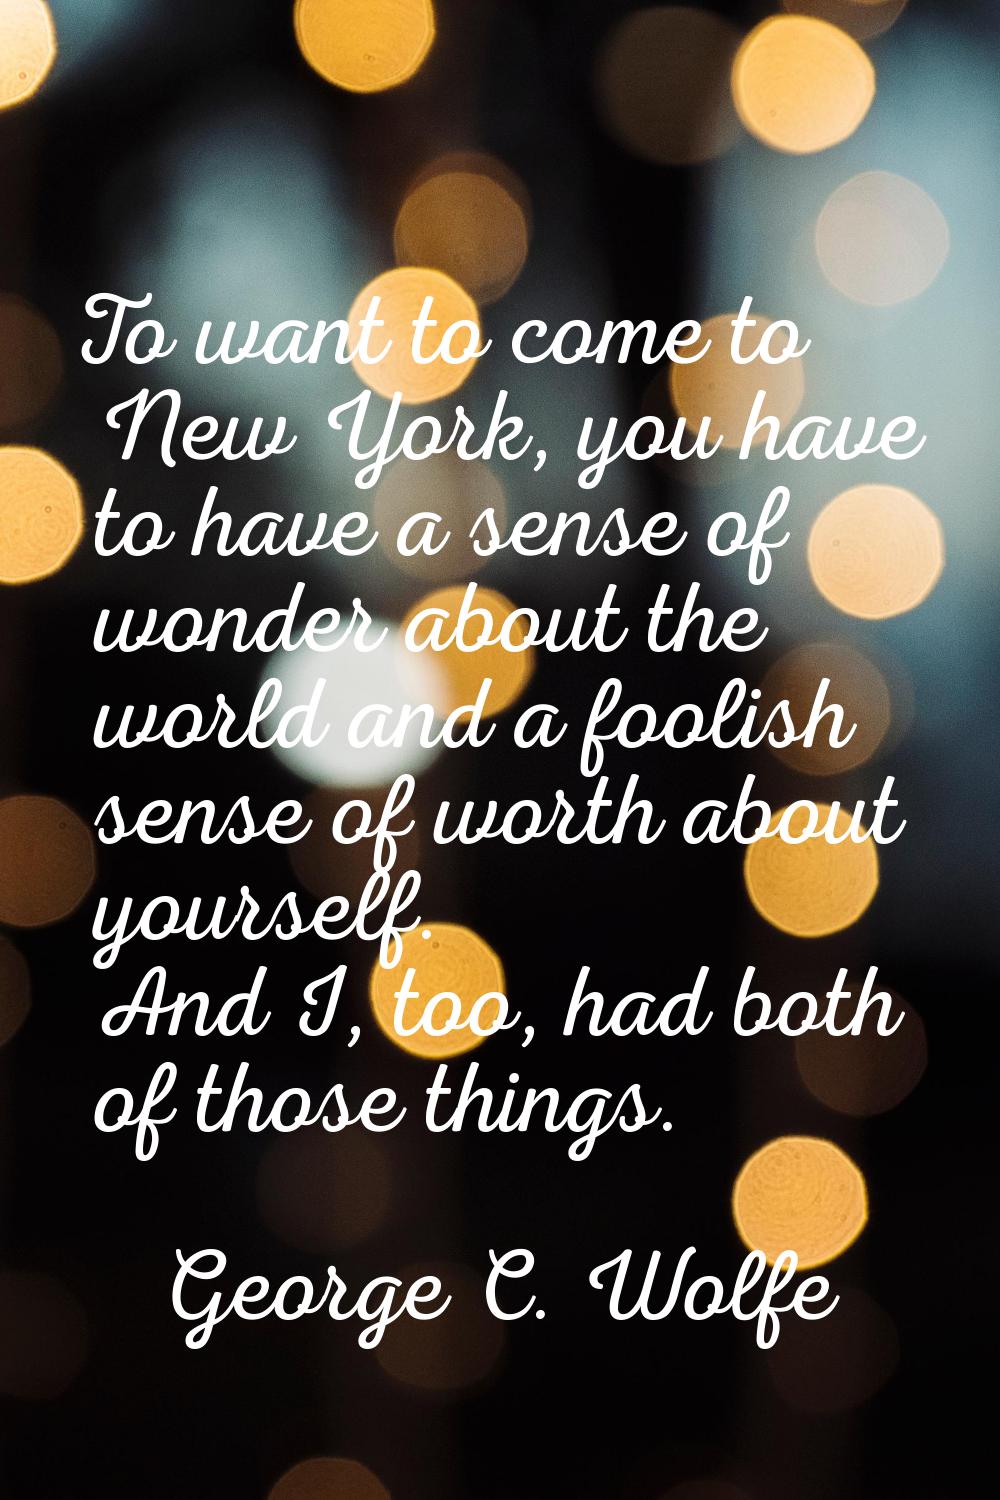 To want to come to New York, you have to have a sense of wonder about the world and a foolish sense